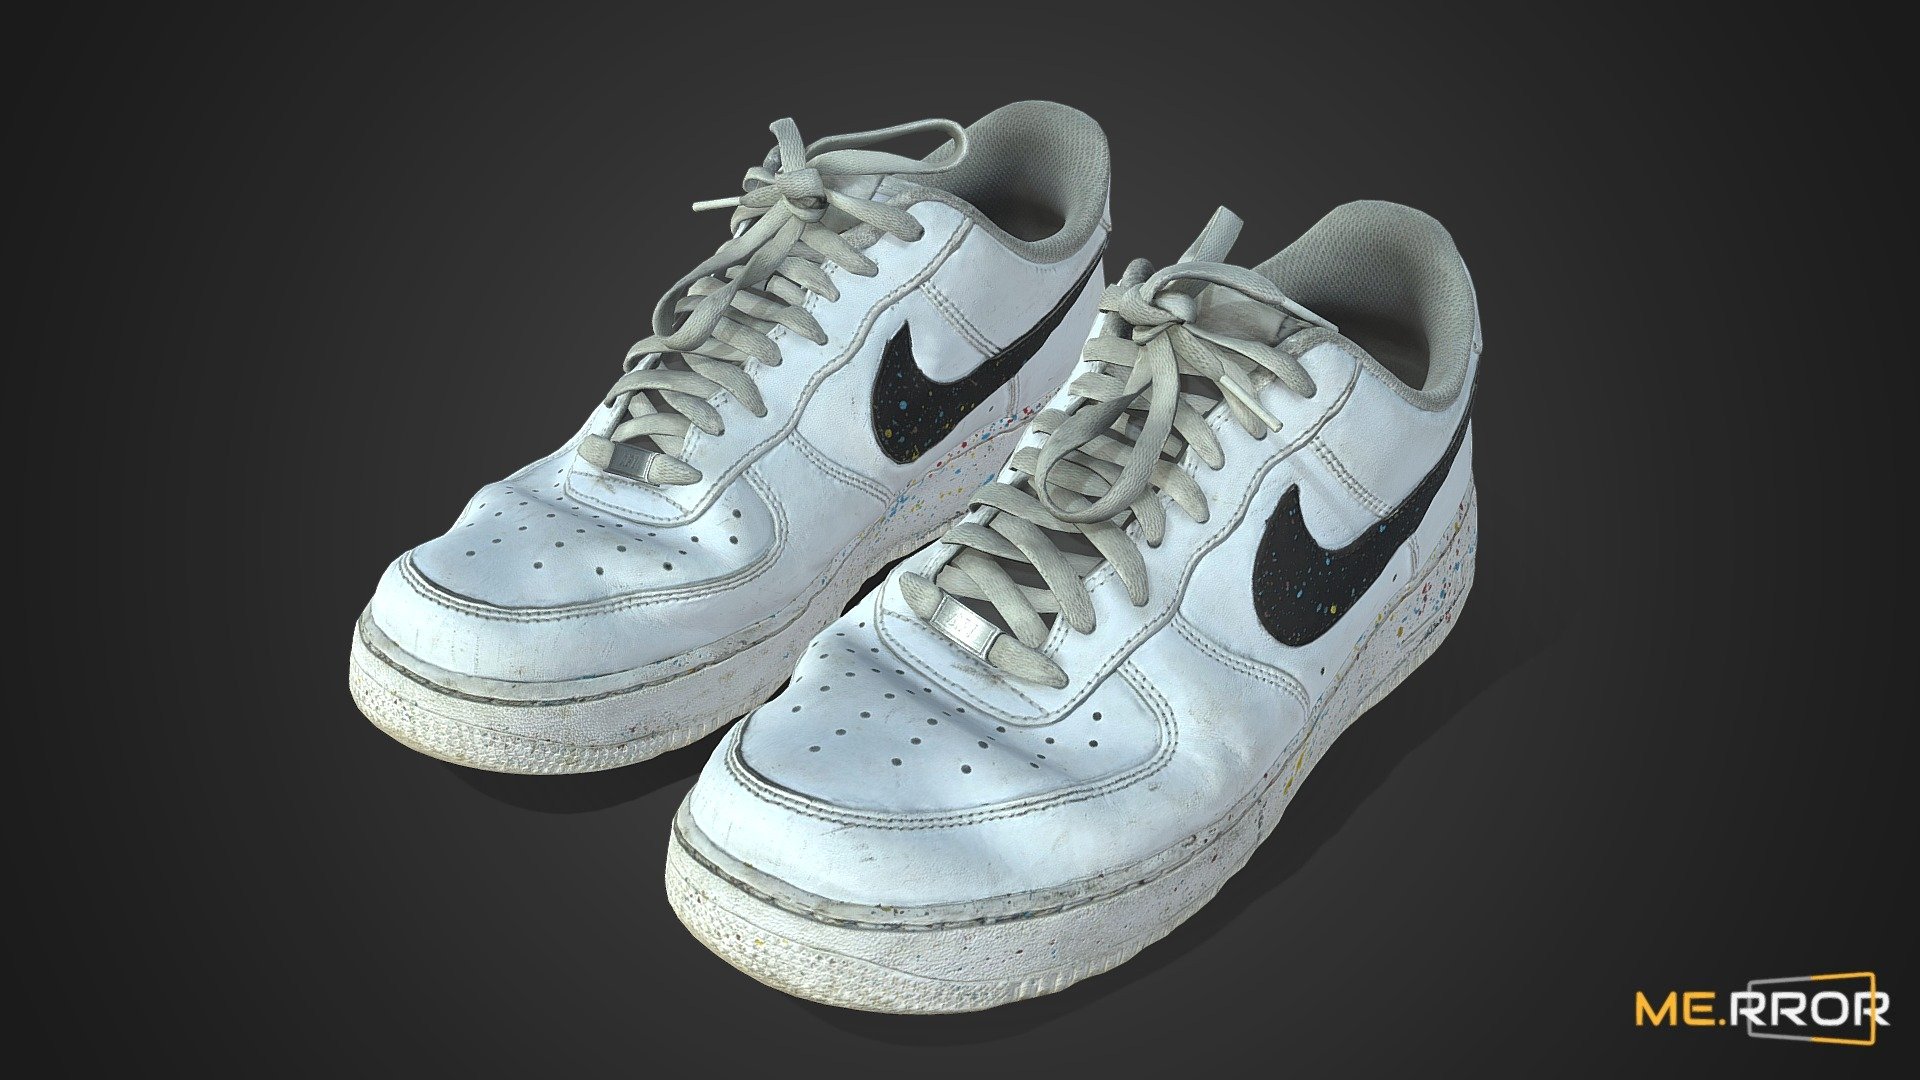 Share 184+ sneakers 3d model